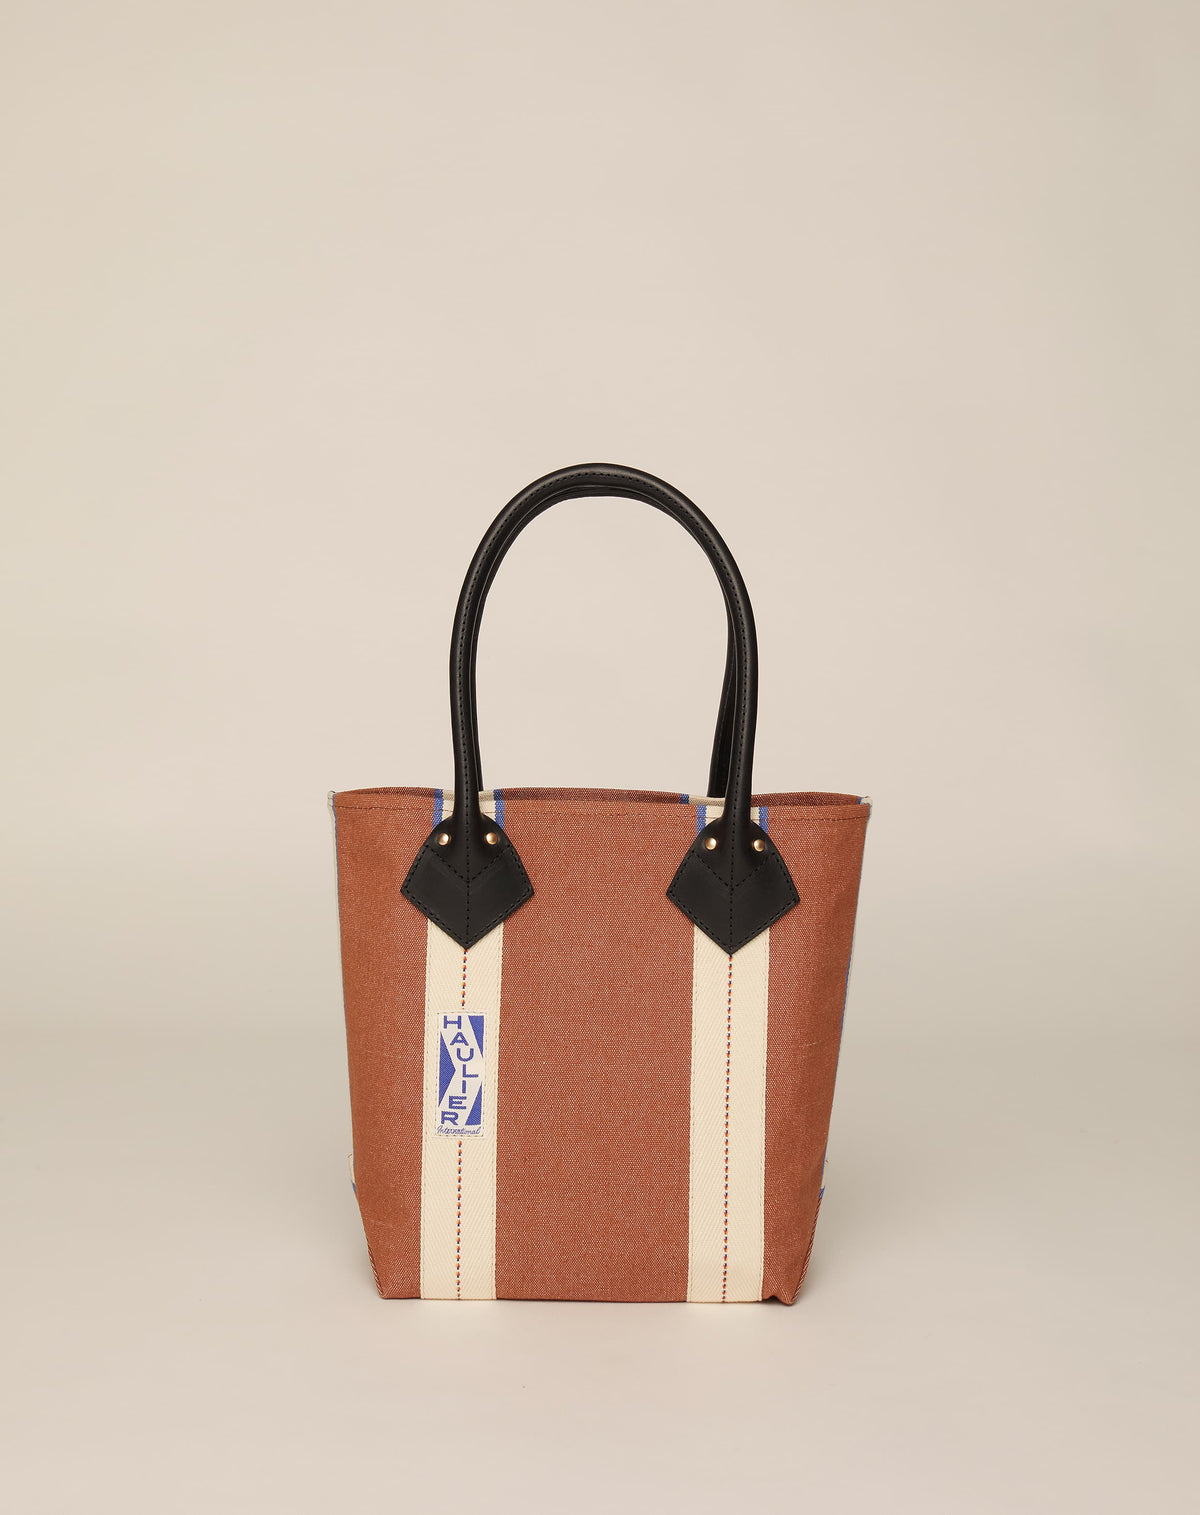 Image of small classic canvas tote bag in tan colour with black leather handles and contrasting stripes.